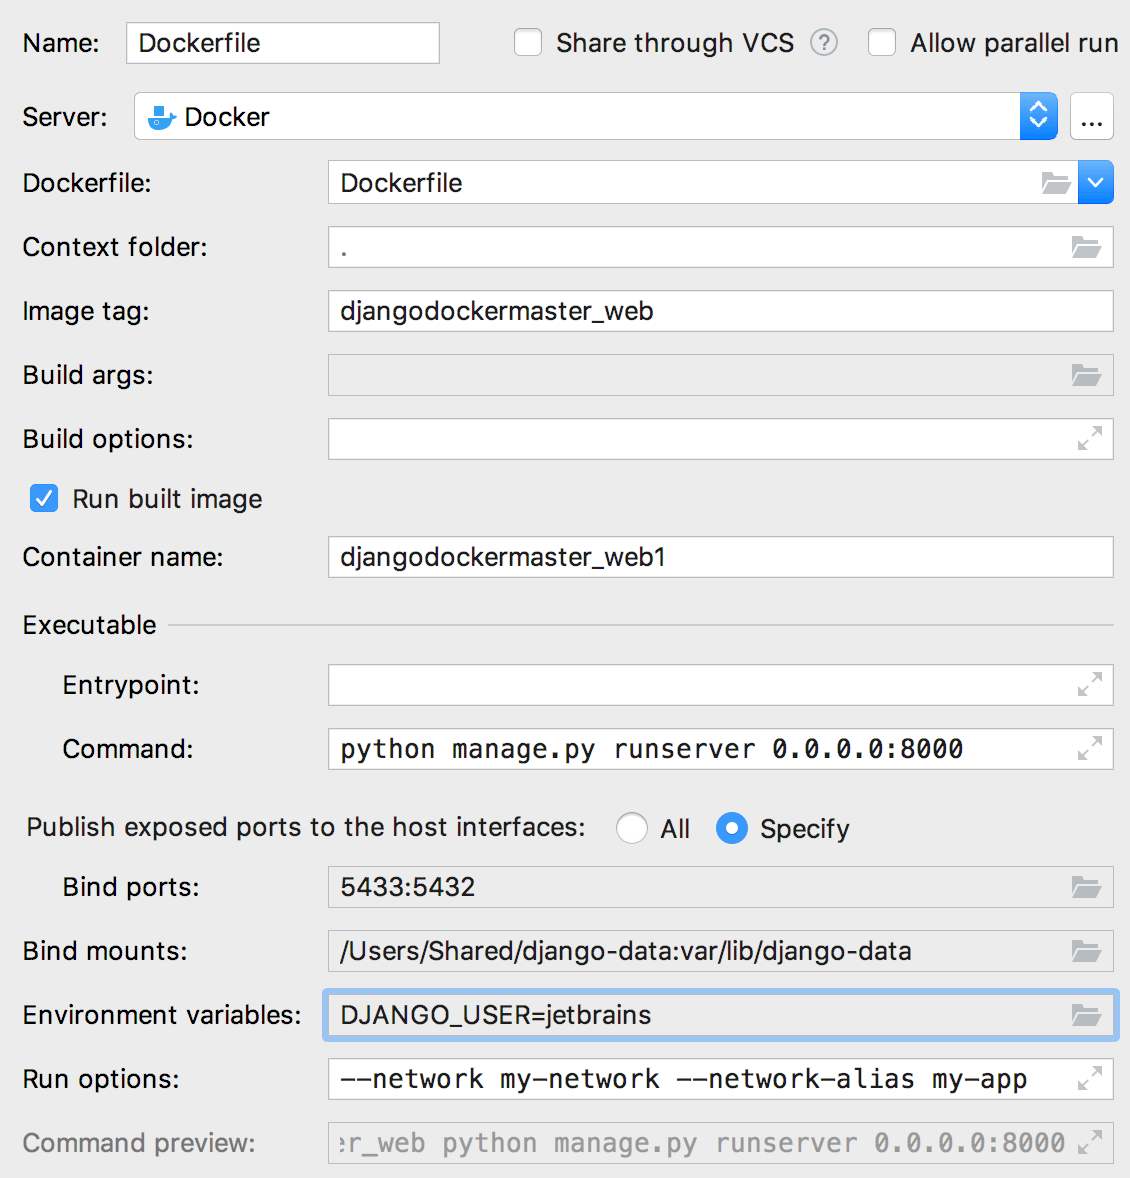 The Edit Deployment Configuration dialog with environment variables